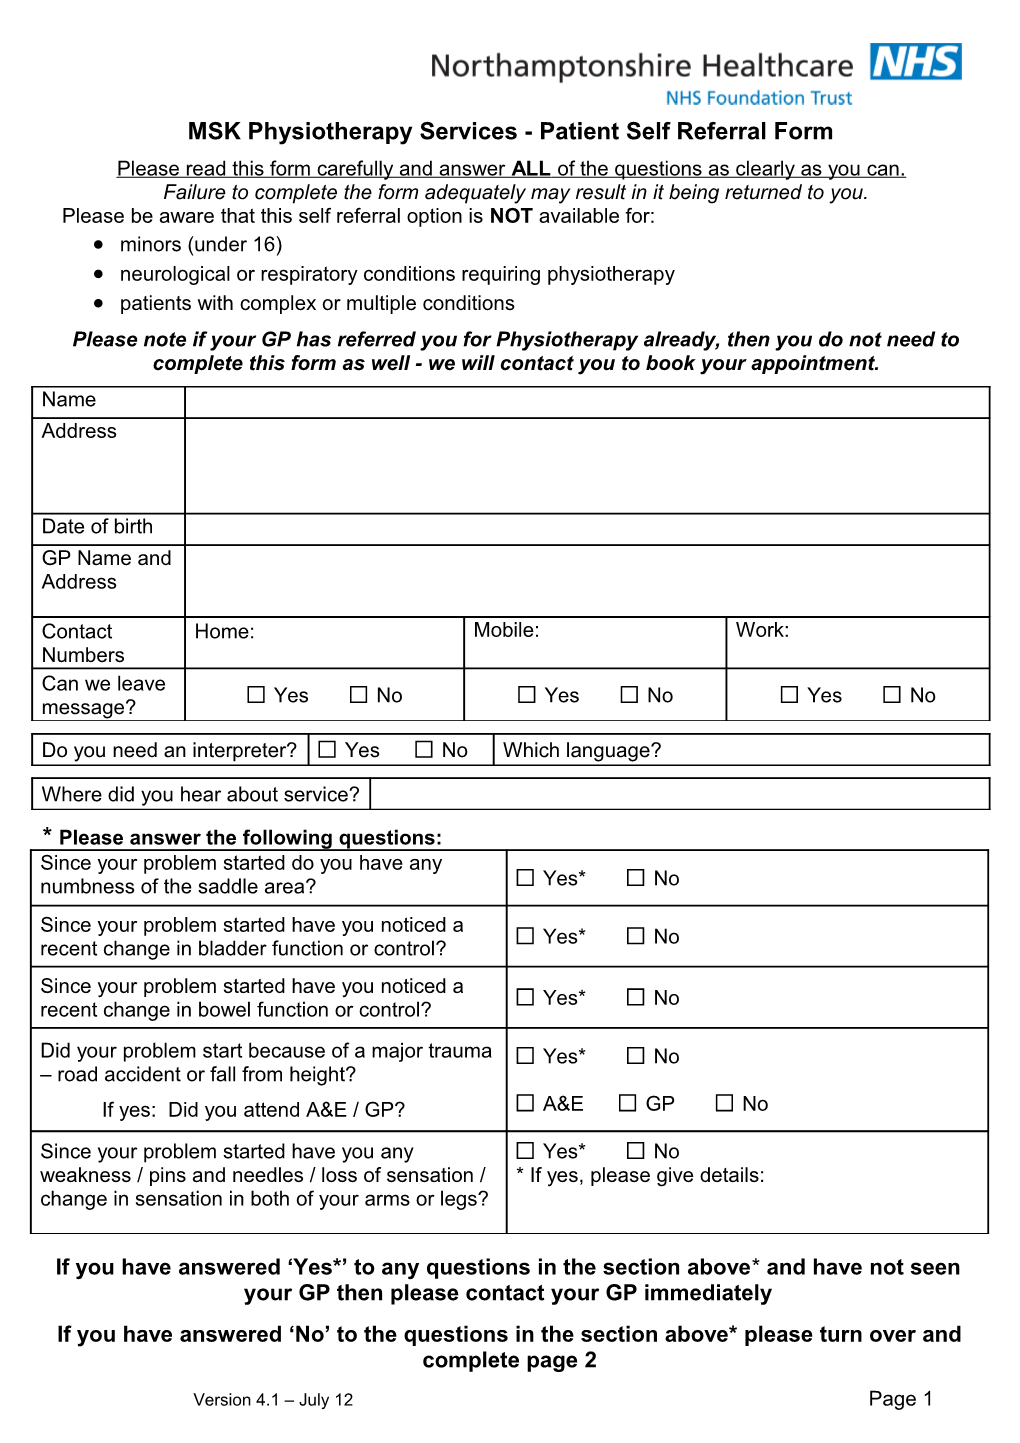 Physiotherapy Services - Patient Self Referral Form